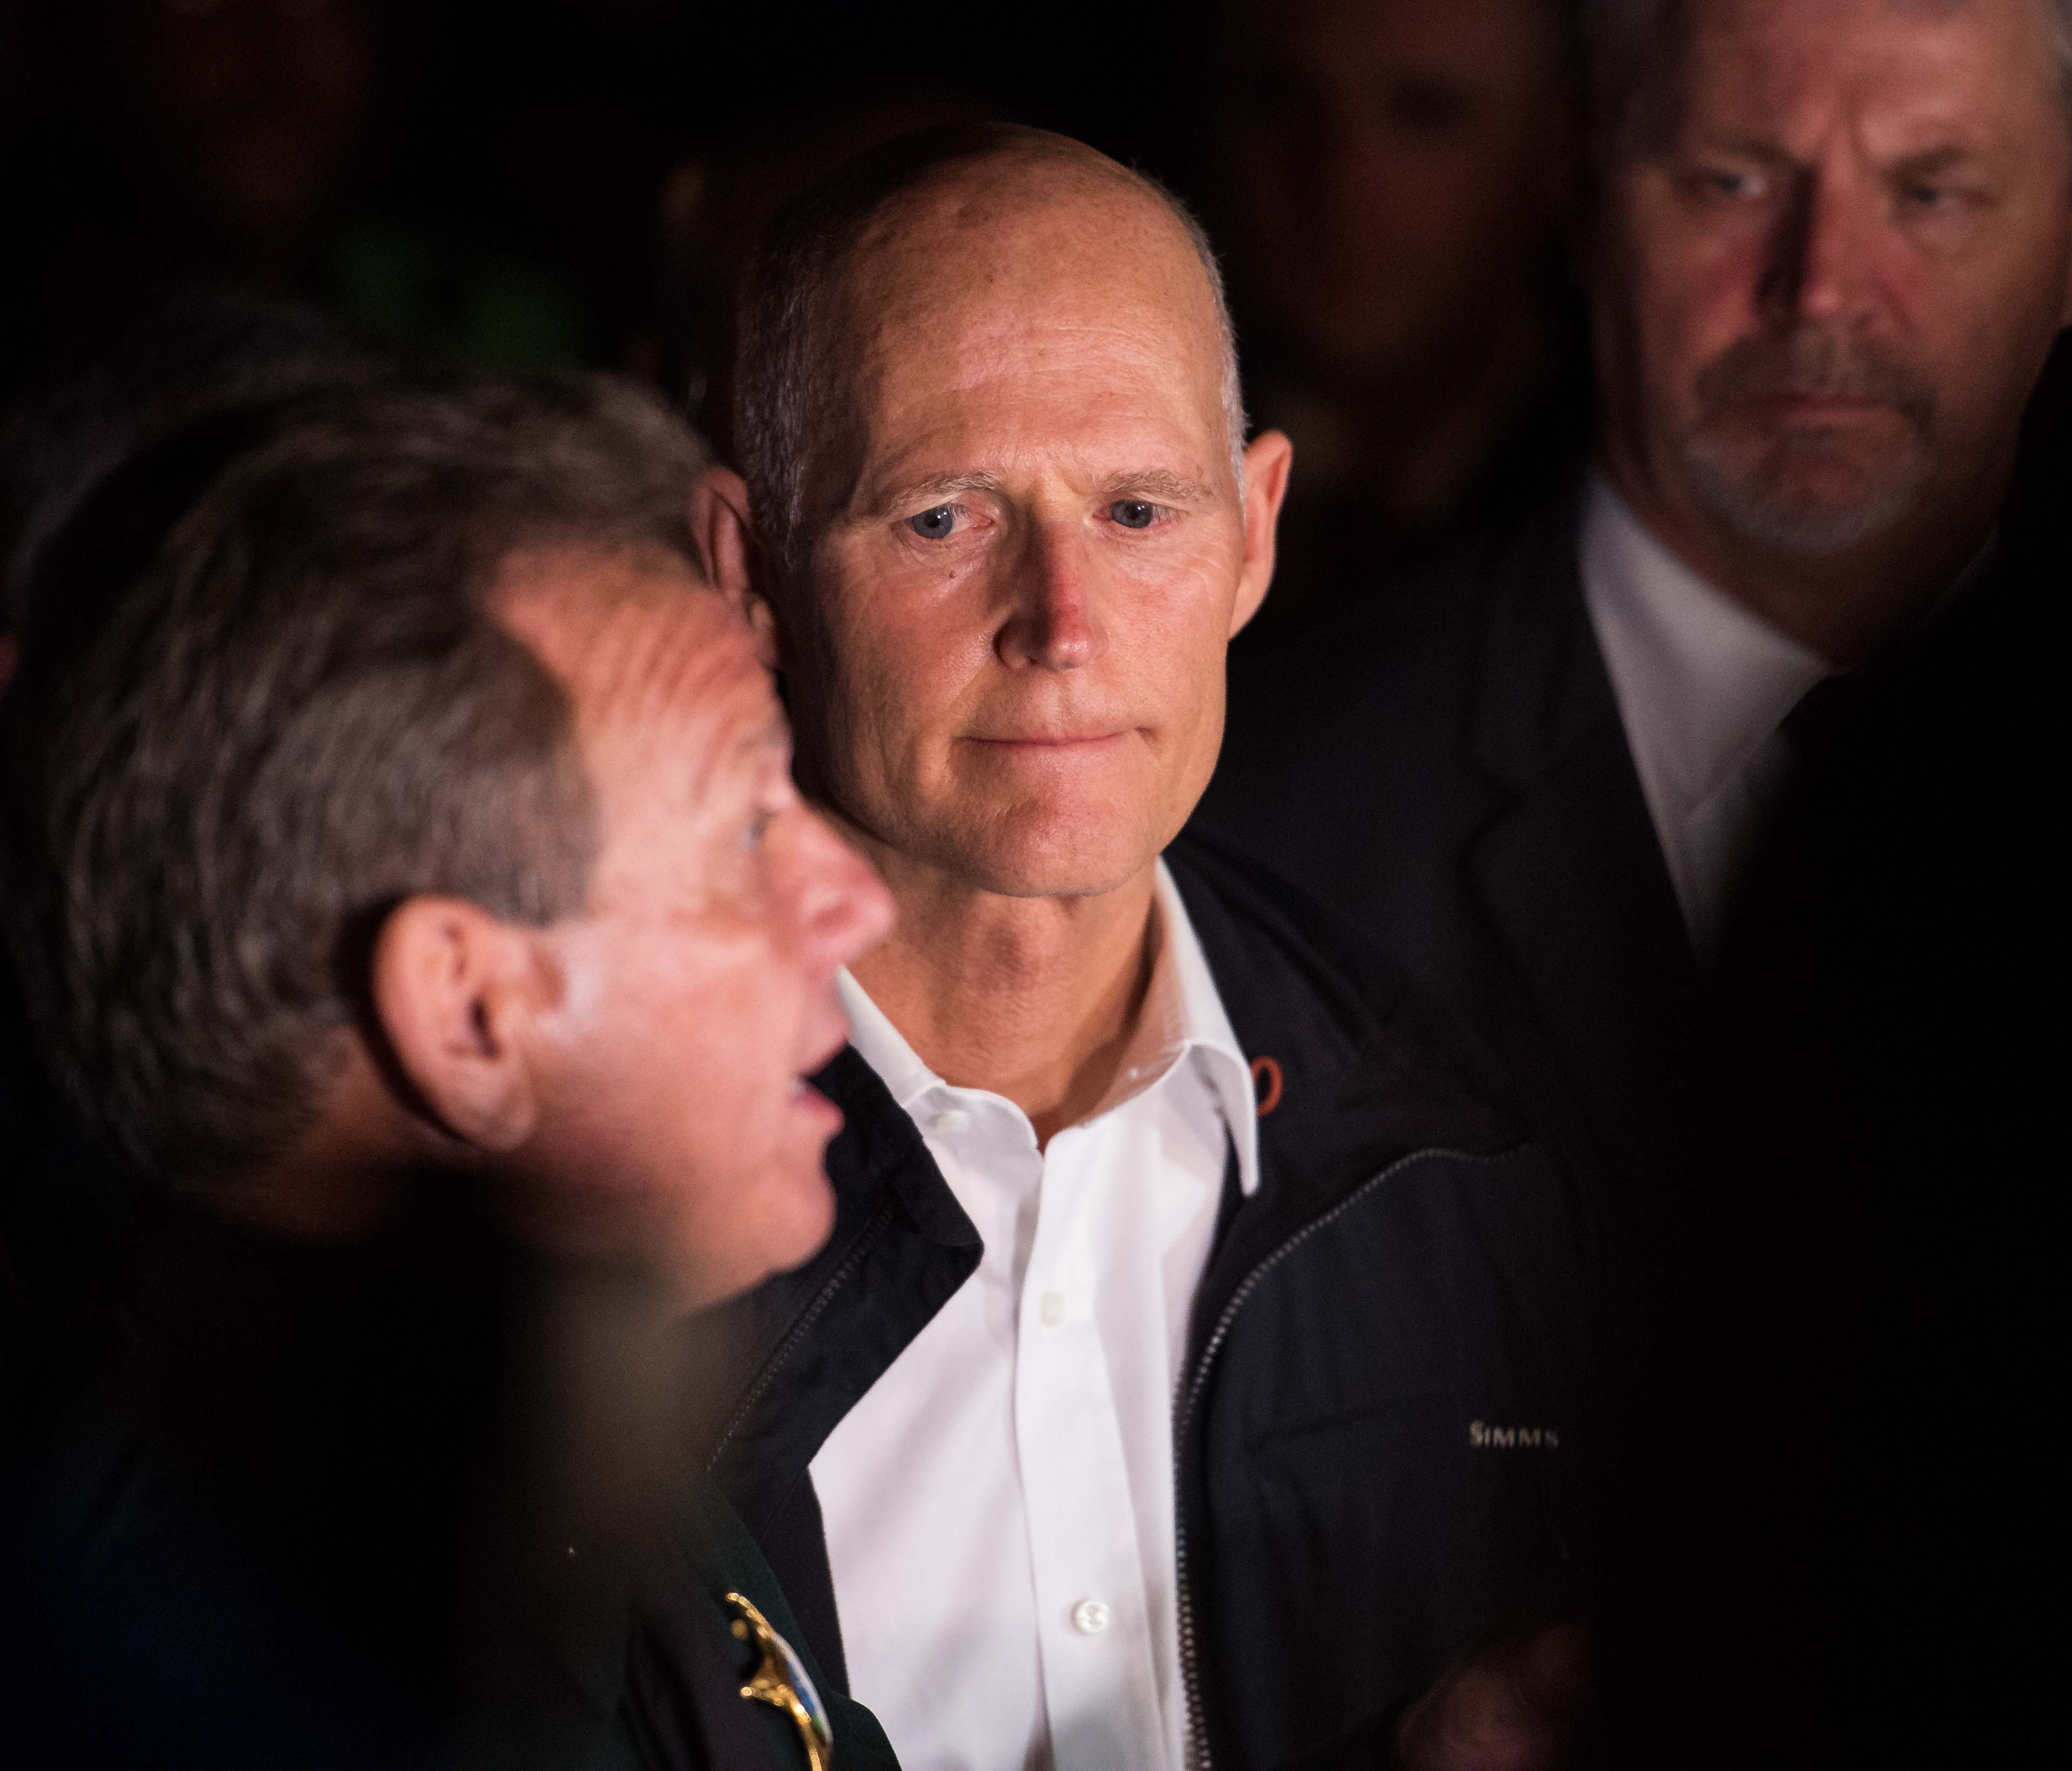 Florida Gov. Rick Scott listens to Broward County Sheriff Scott Israel speak at a news conference near Marjory Stoneman Douglas High School in Parkland on Wednesday, Feb. 14, 2018, following a mass shooting at the school.